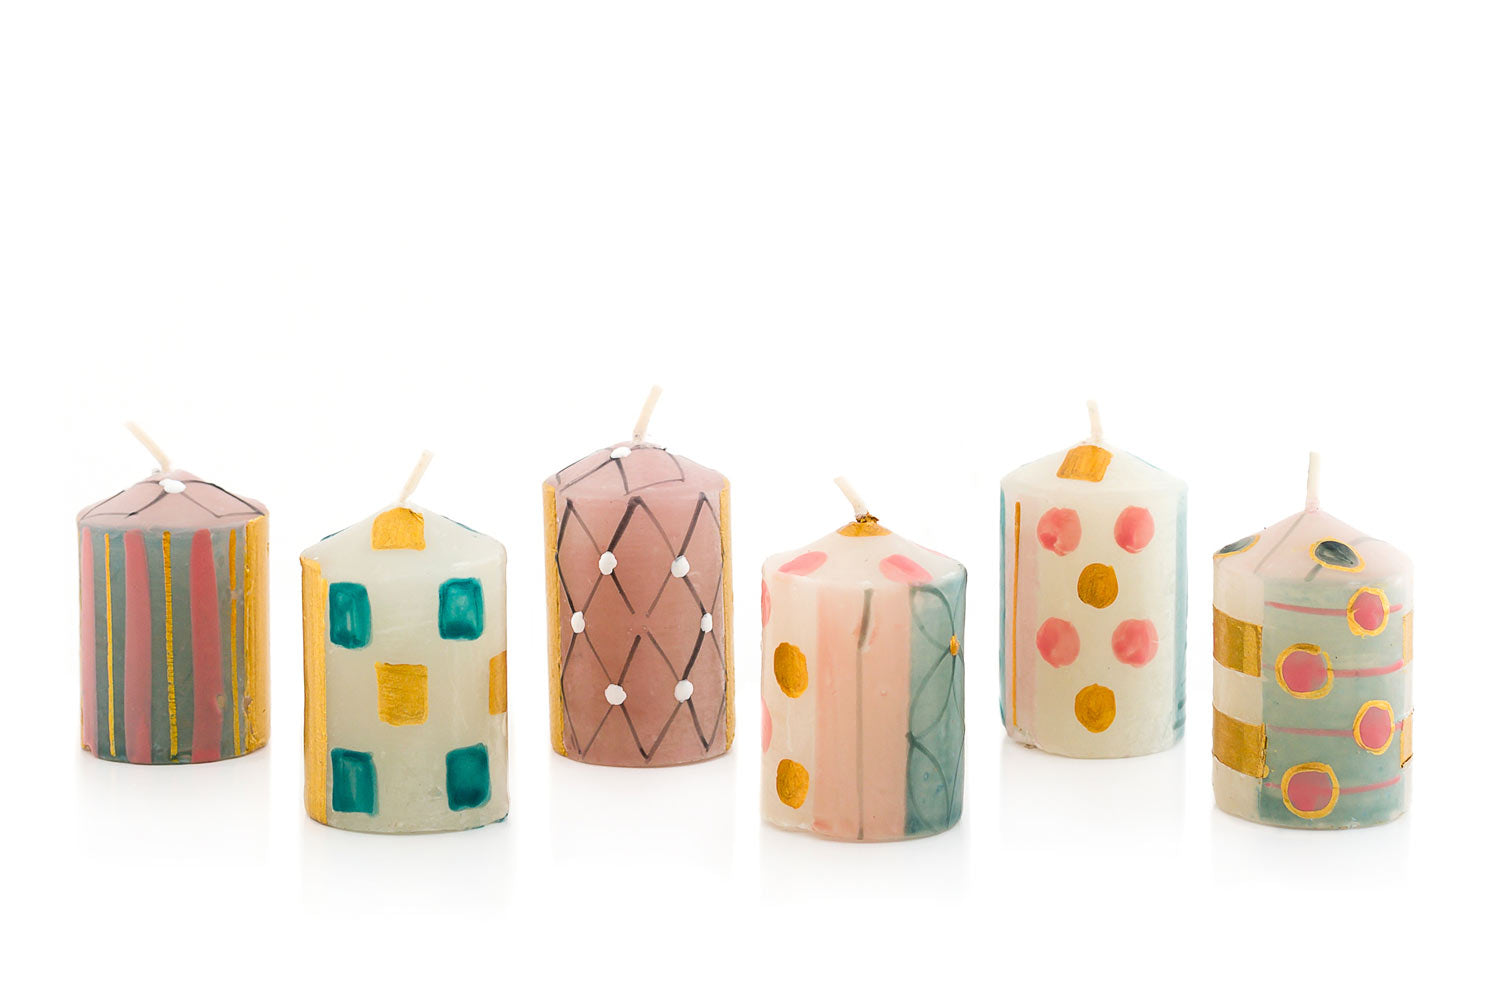 Delight hand made and hand painted collection of votive candles.  6 votive candles in various design of Delight collection painted in pinks, gold, turquoise, on white background.